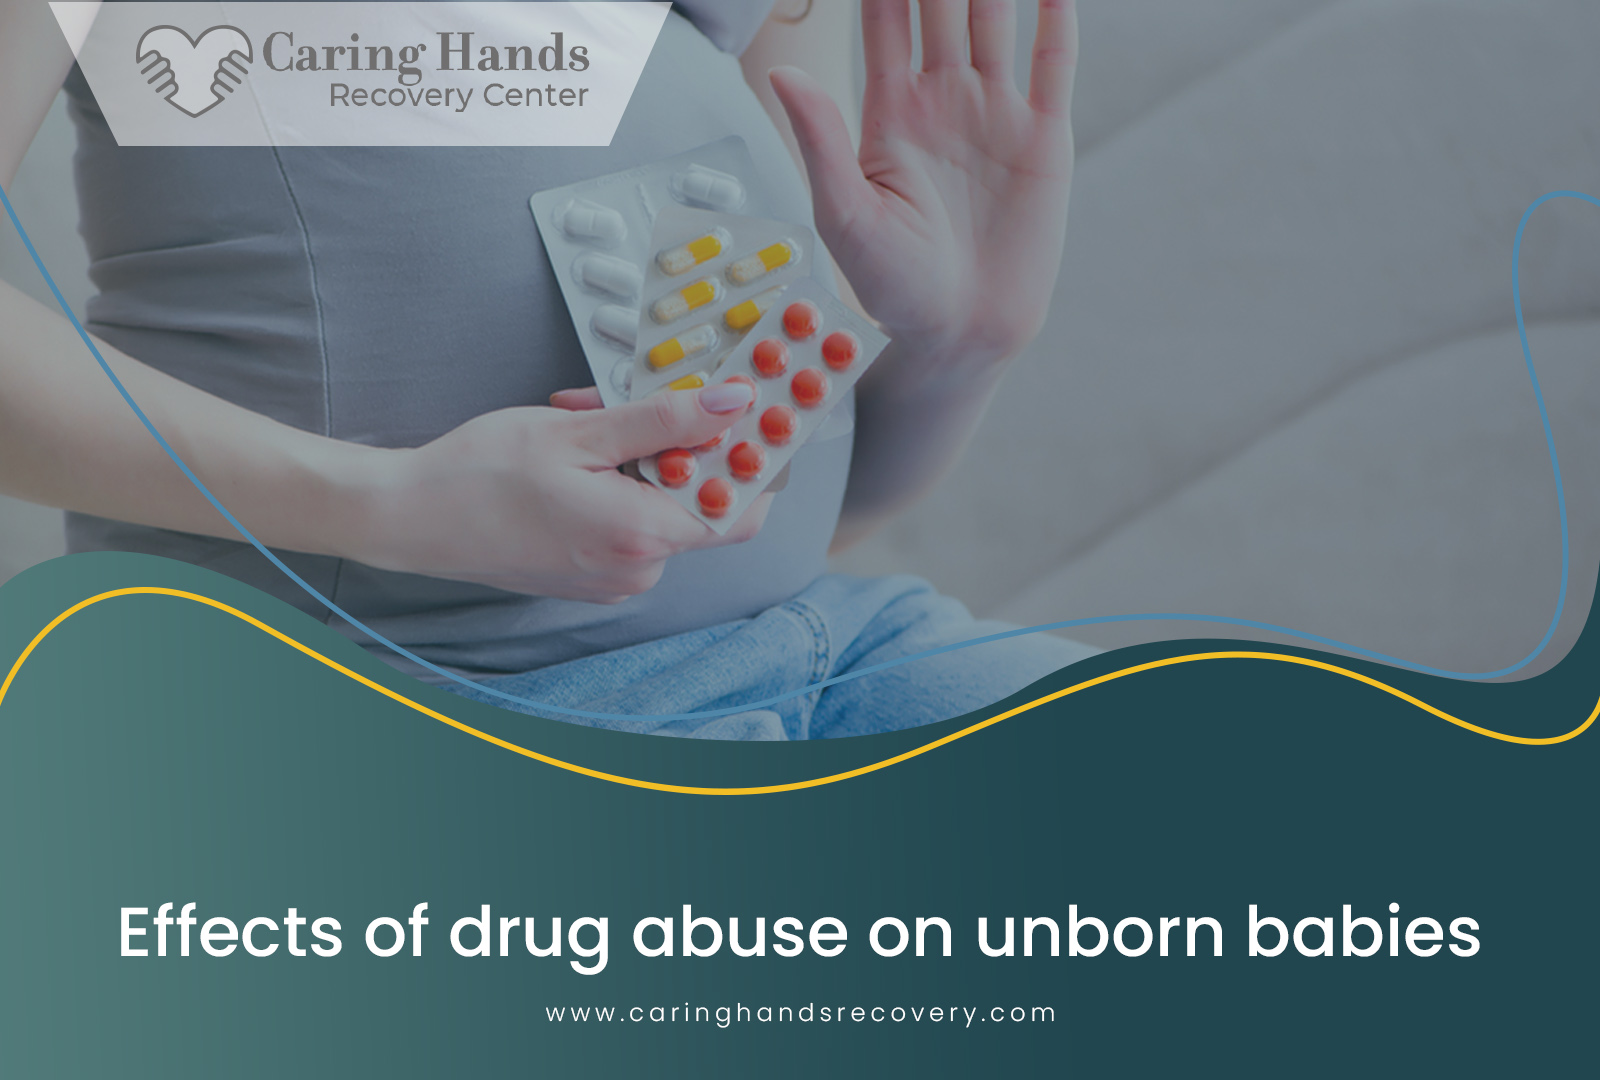 EFFECTS OF DRUG ABUSE ON UNBORN BABIES